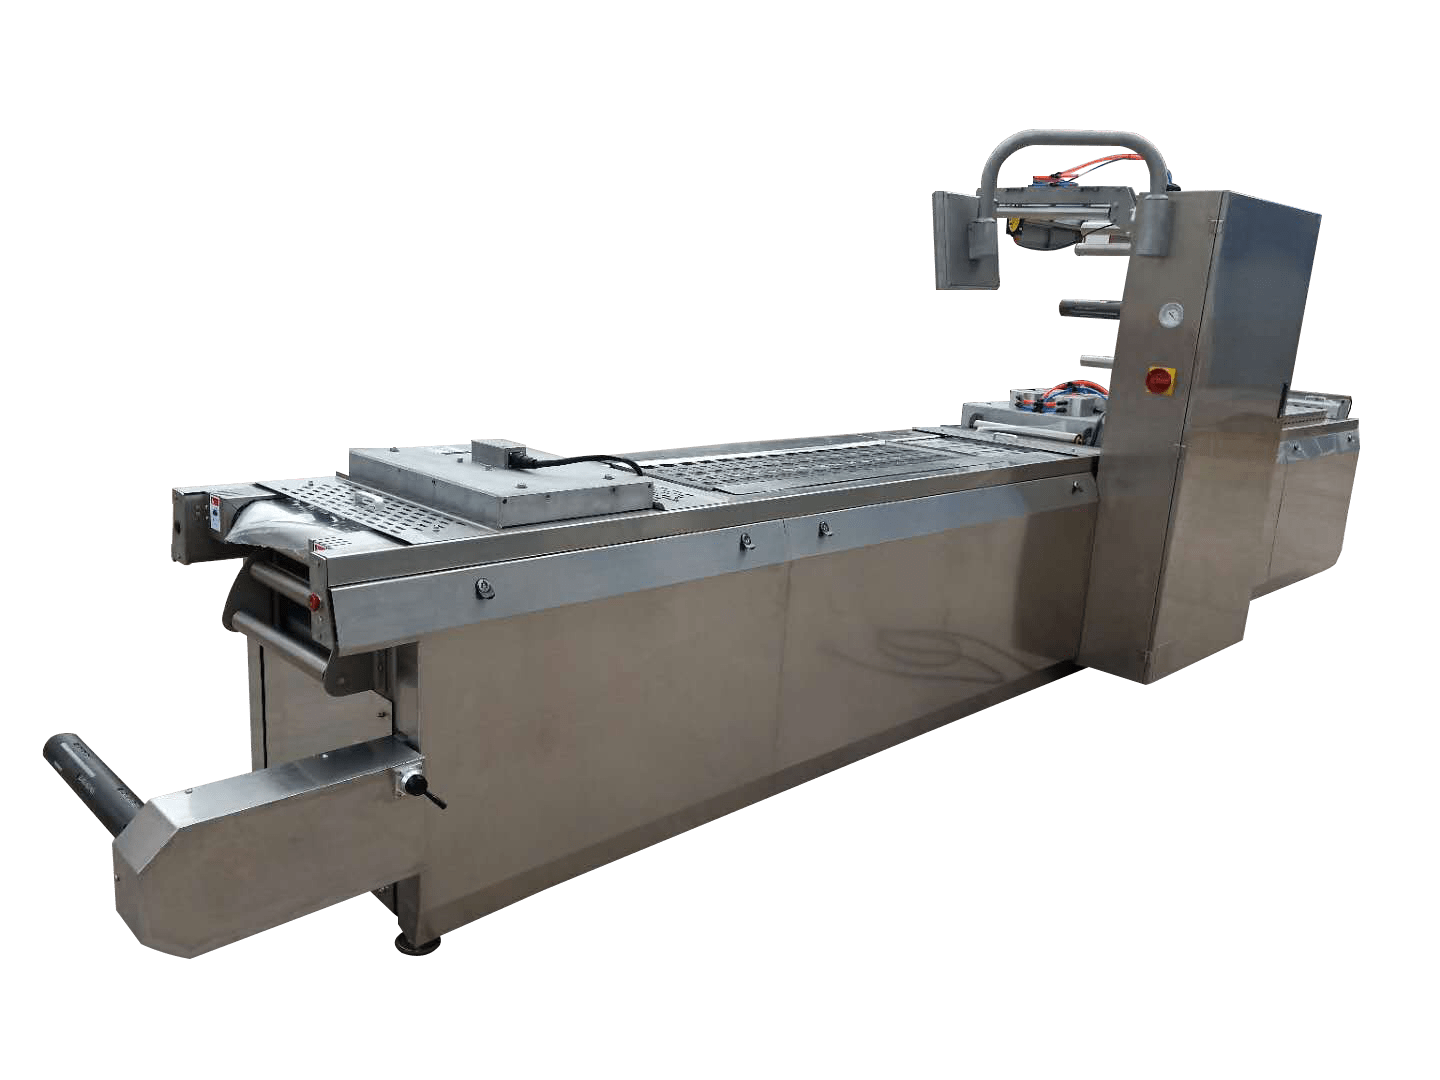 About the Stretch Film Vacuum Packaging Machine how much Do You Know